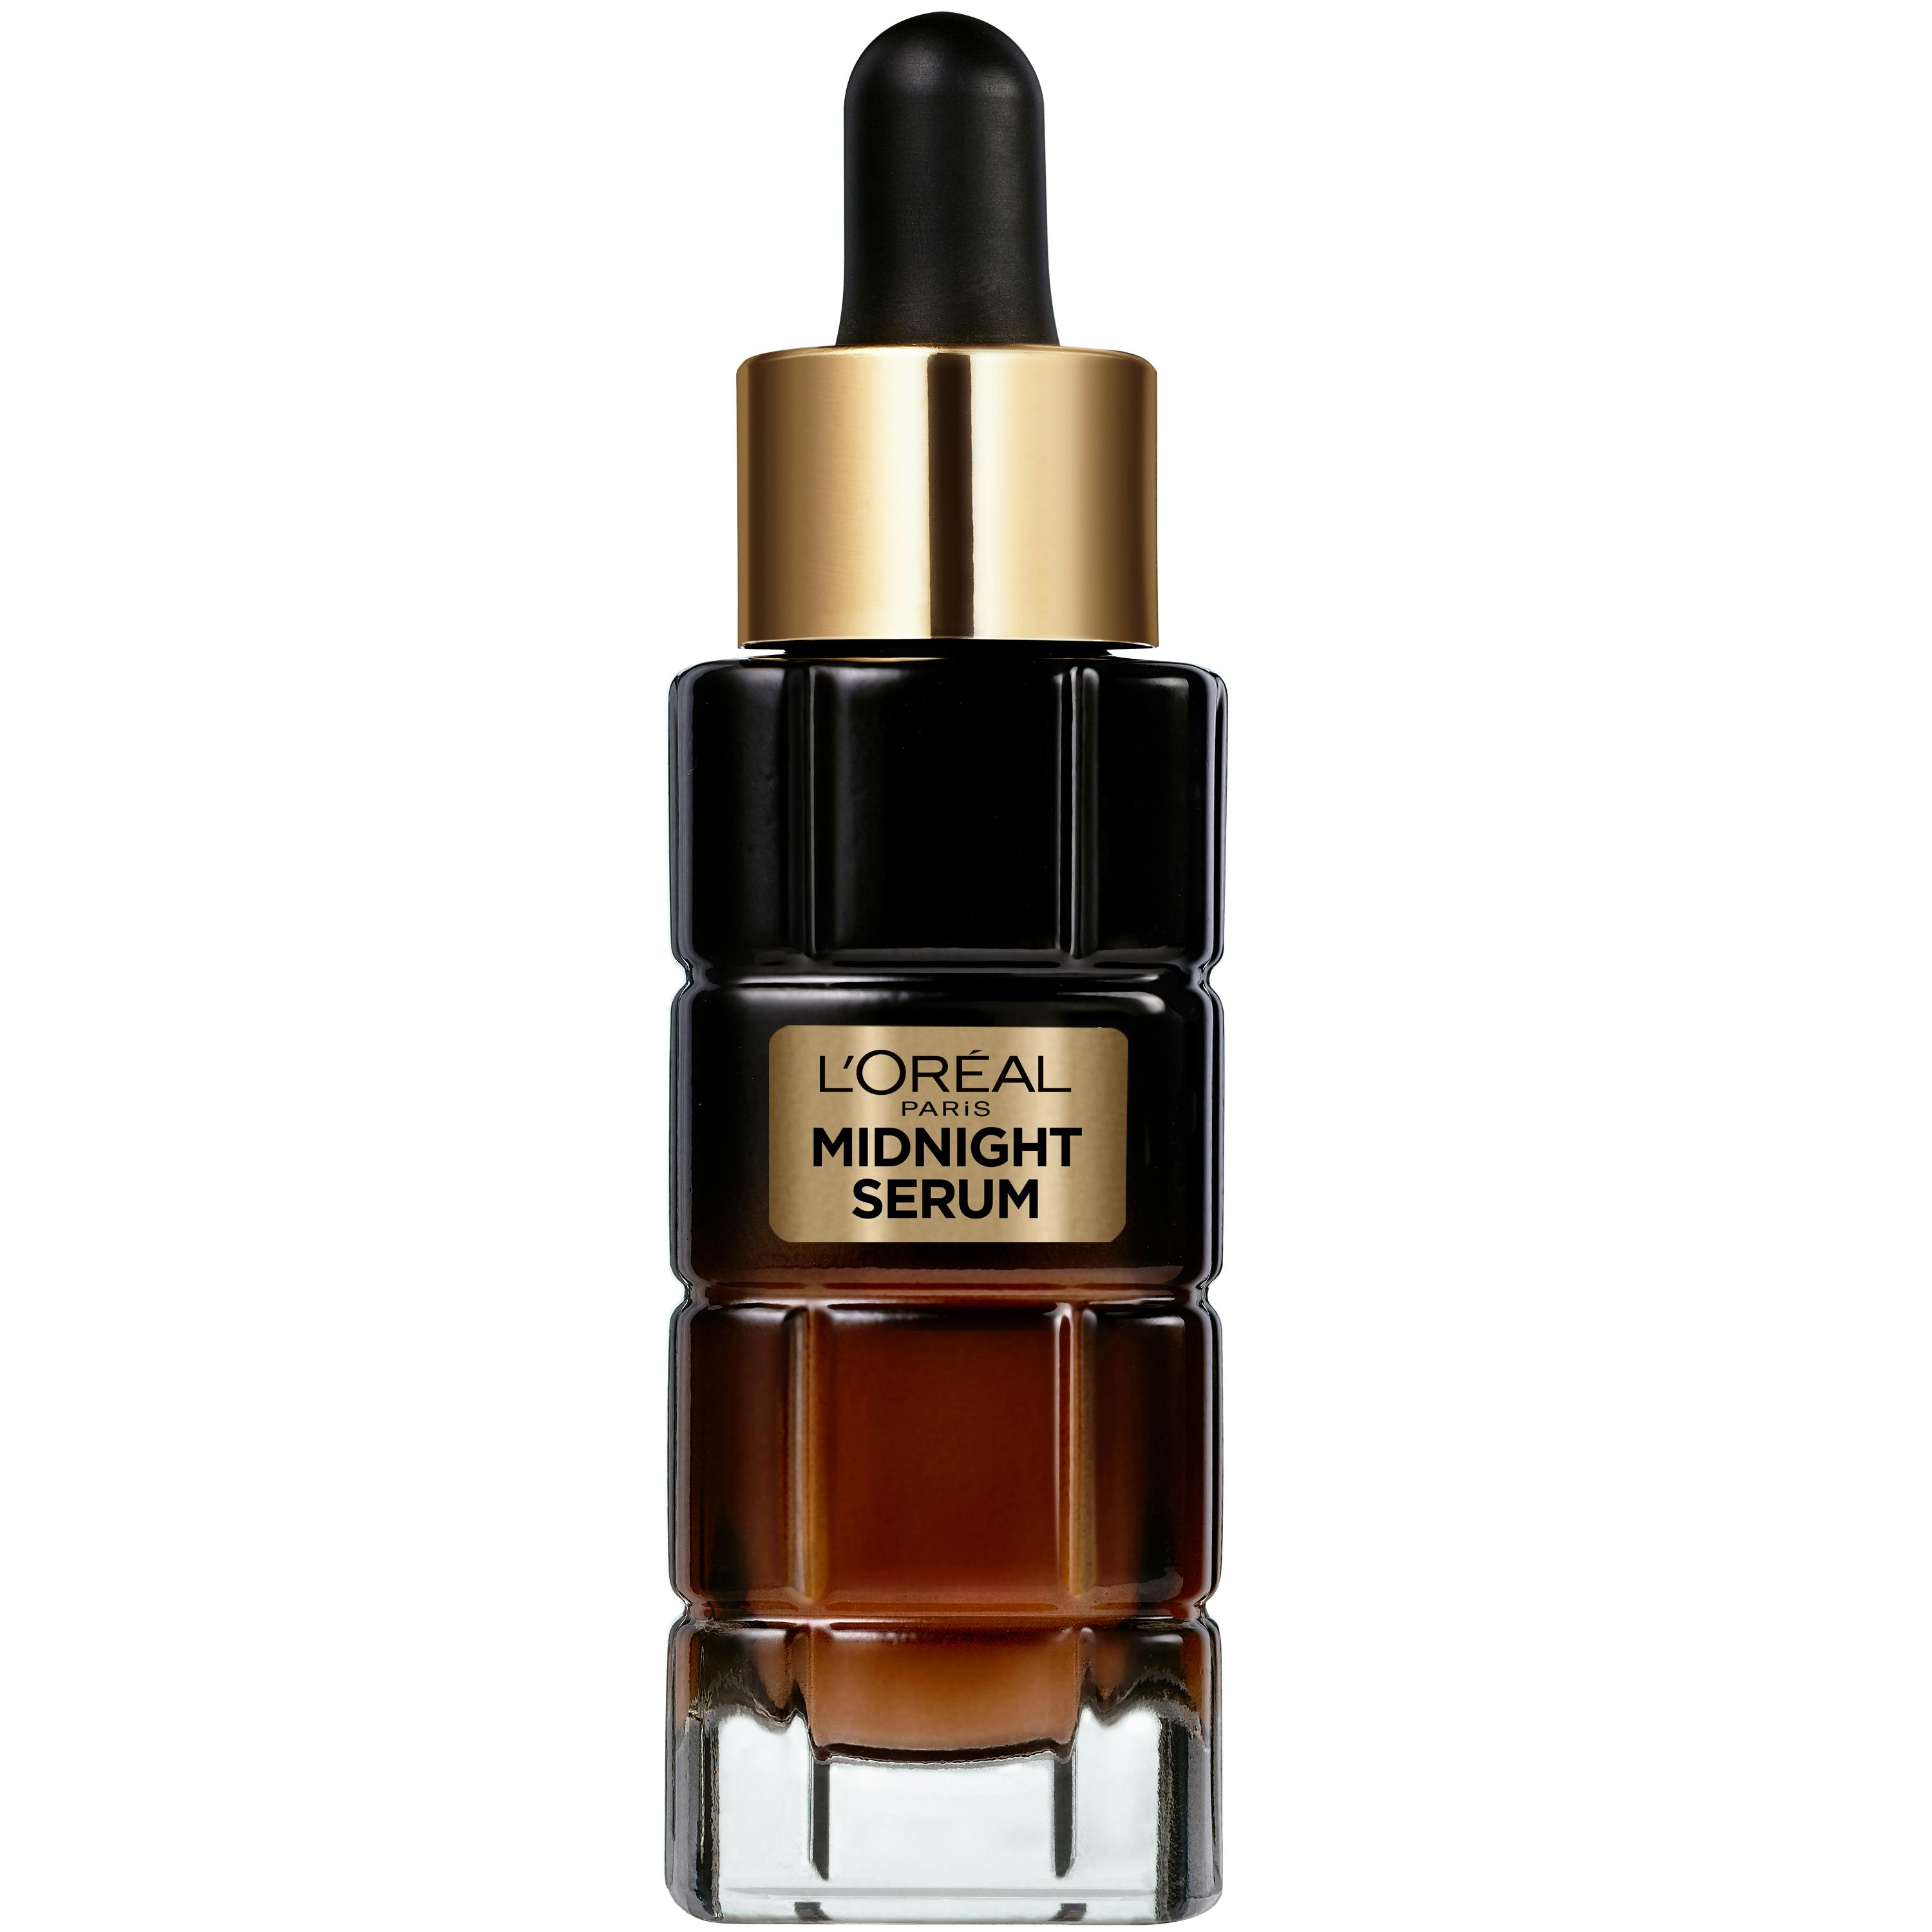 L'Oréal Perfect Cell Renewal Midnight Serum.